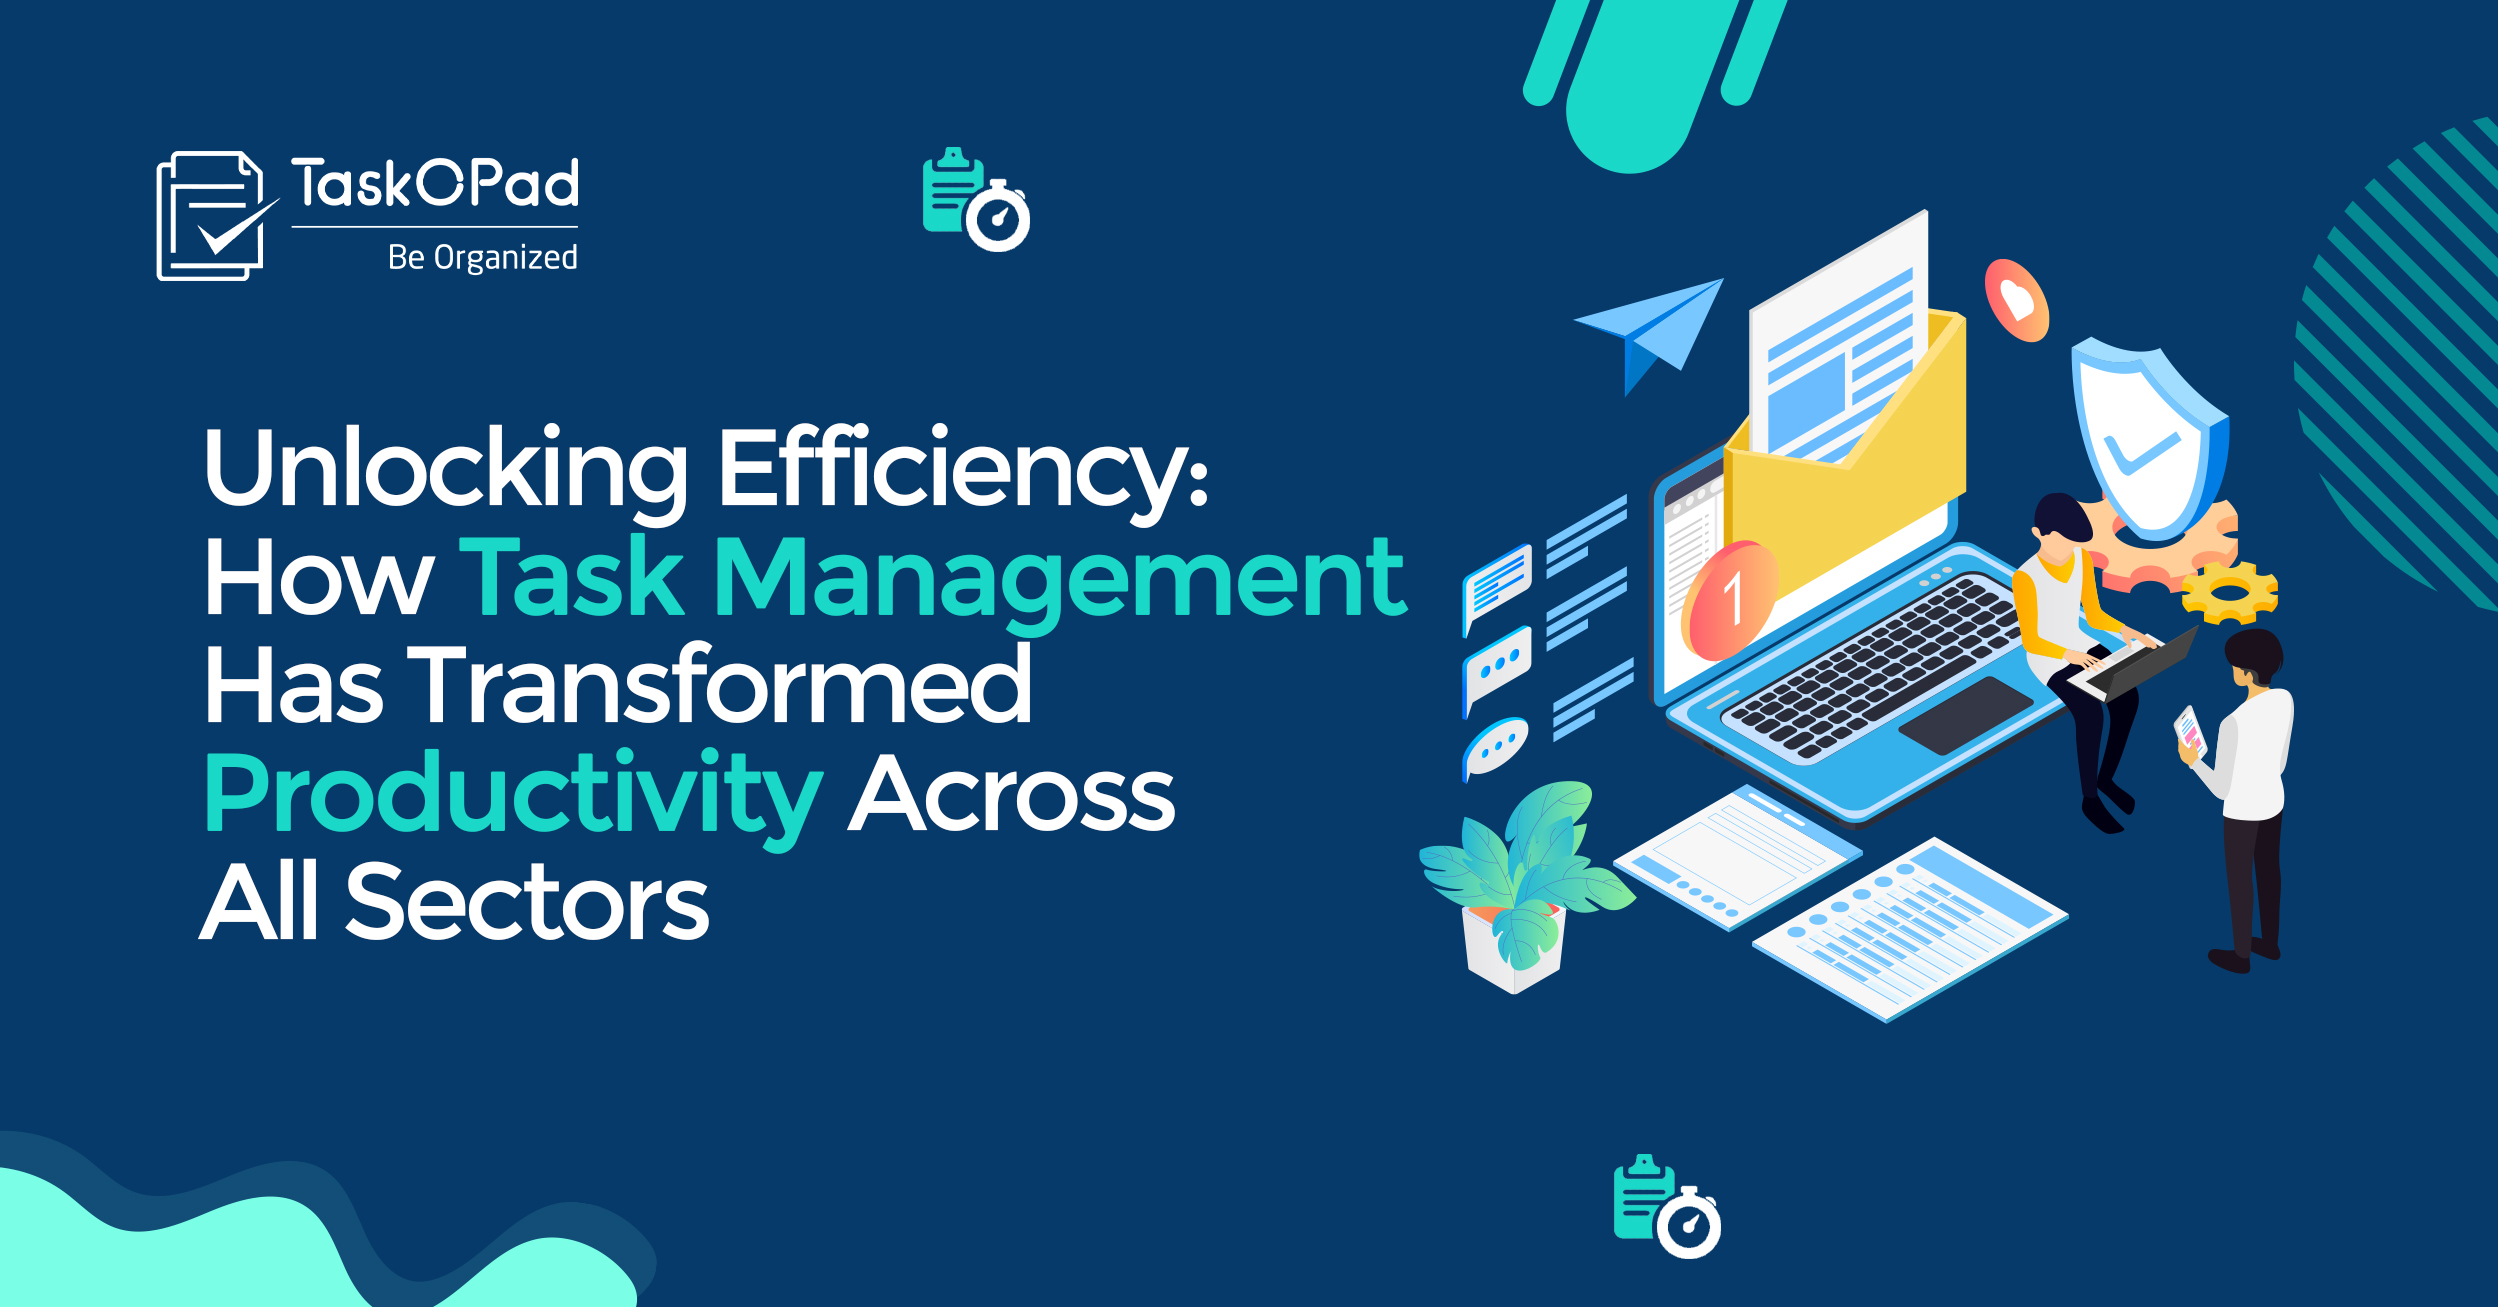 Unlocking Efficiency: How Task Management Has Transformed Productivity Across All Sectors